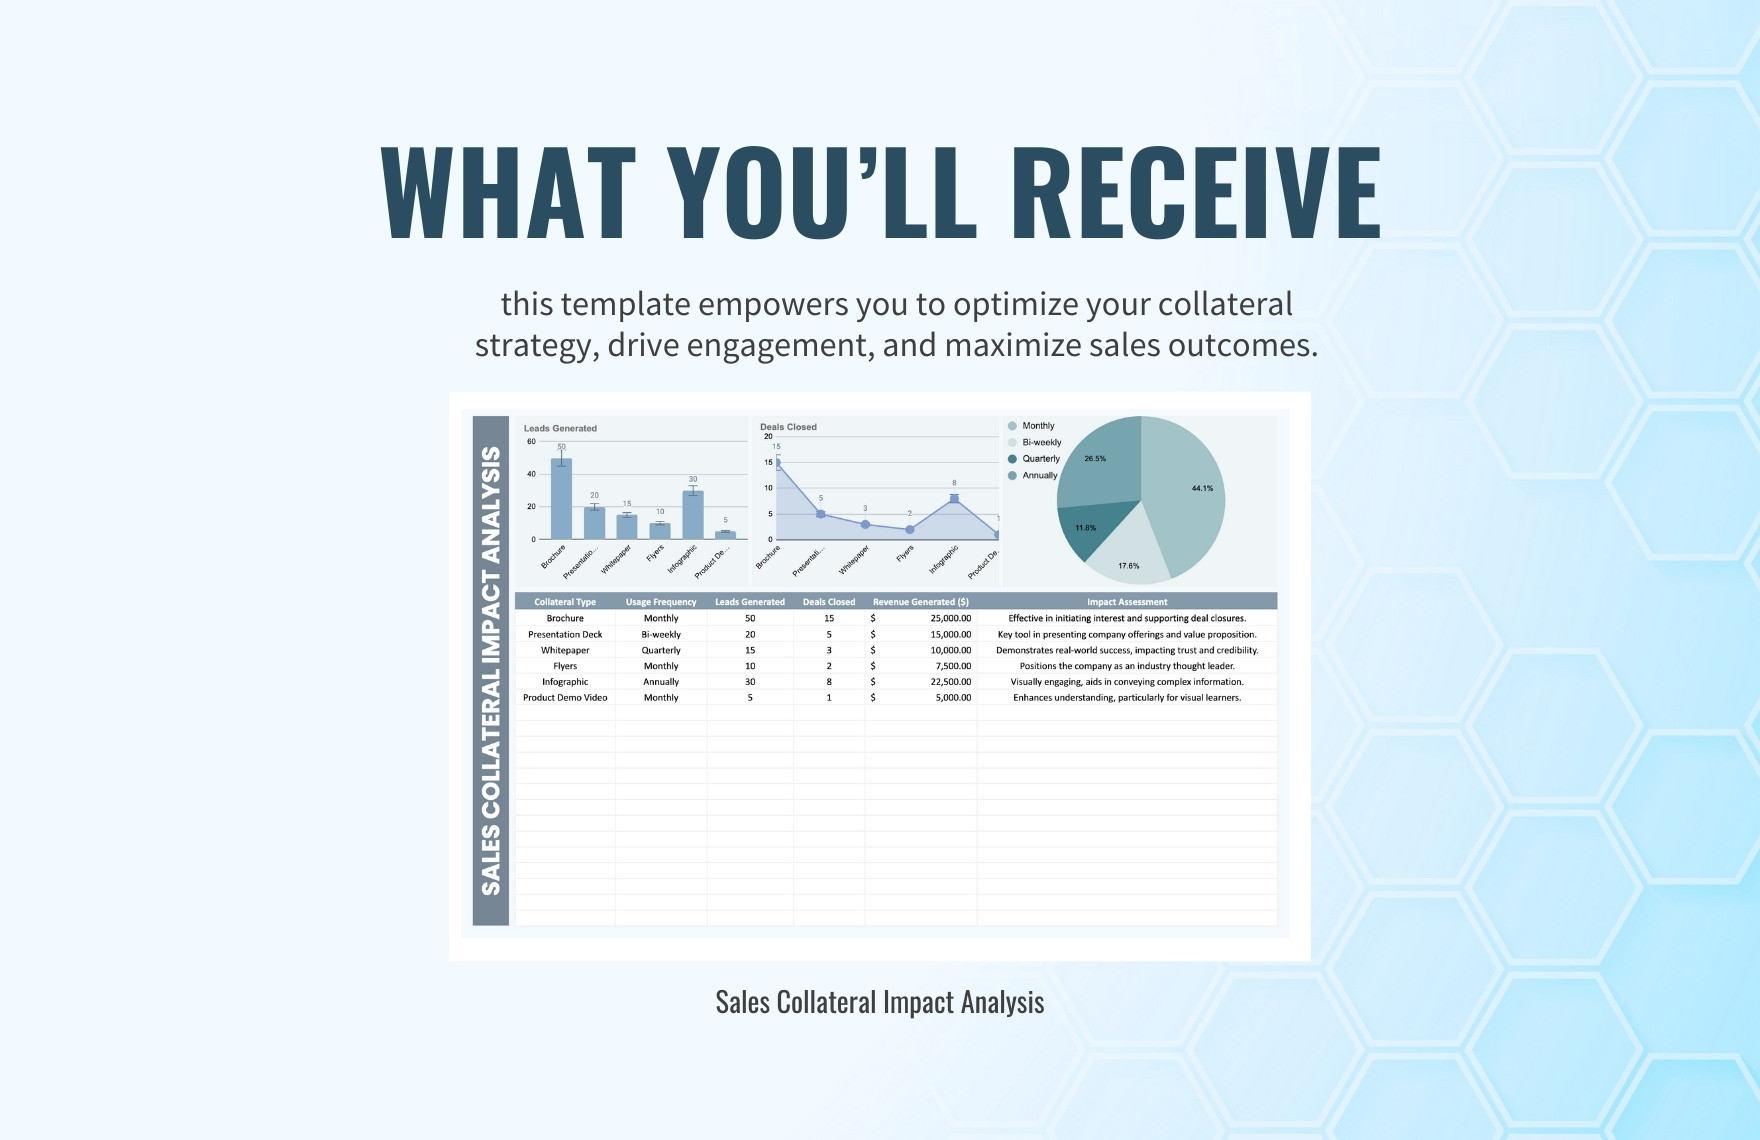 Sales Collateral Impact  Analysis Template